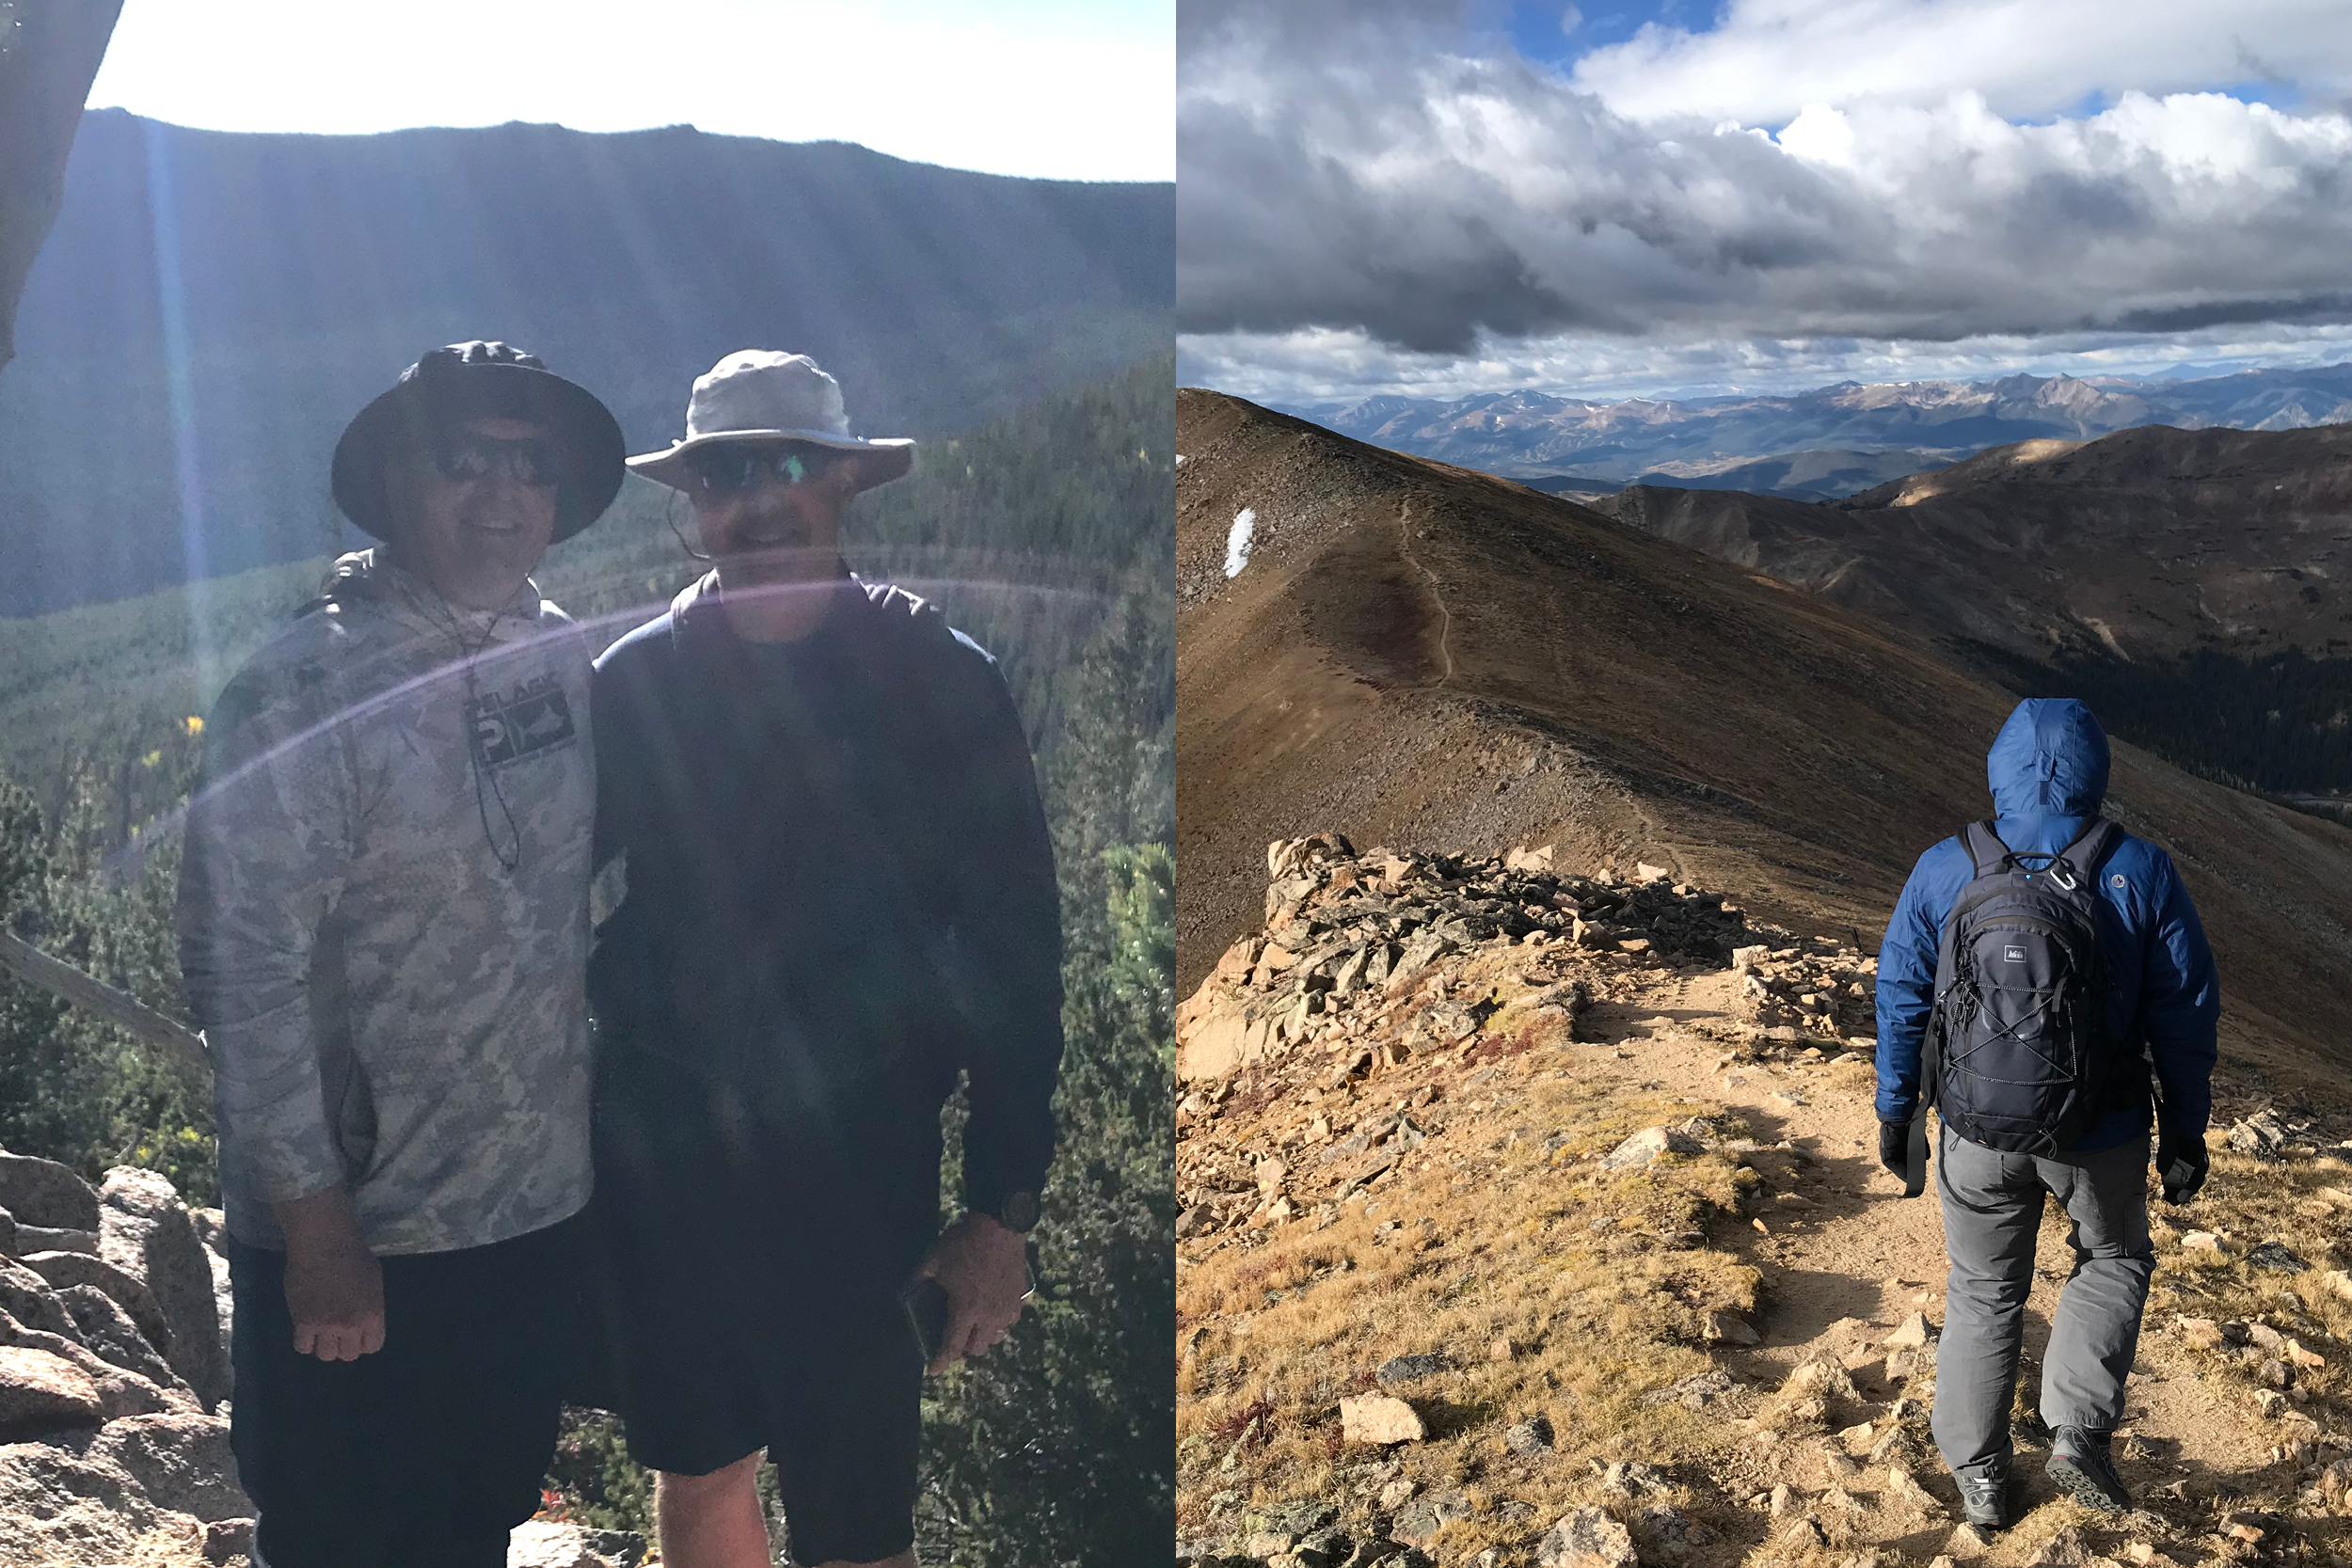 Training climbs at Rocky Mountain National Park with my friend Neil White. We climbed 13,000 feet during this training. My climb up Kilimanjaro will be 20,000 feet.